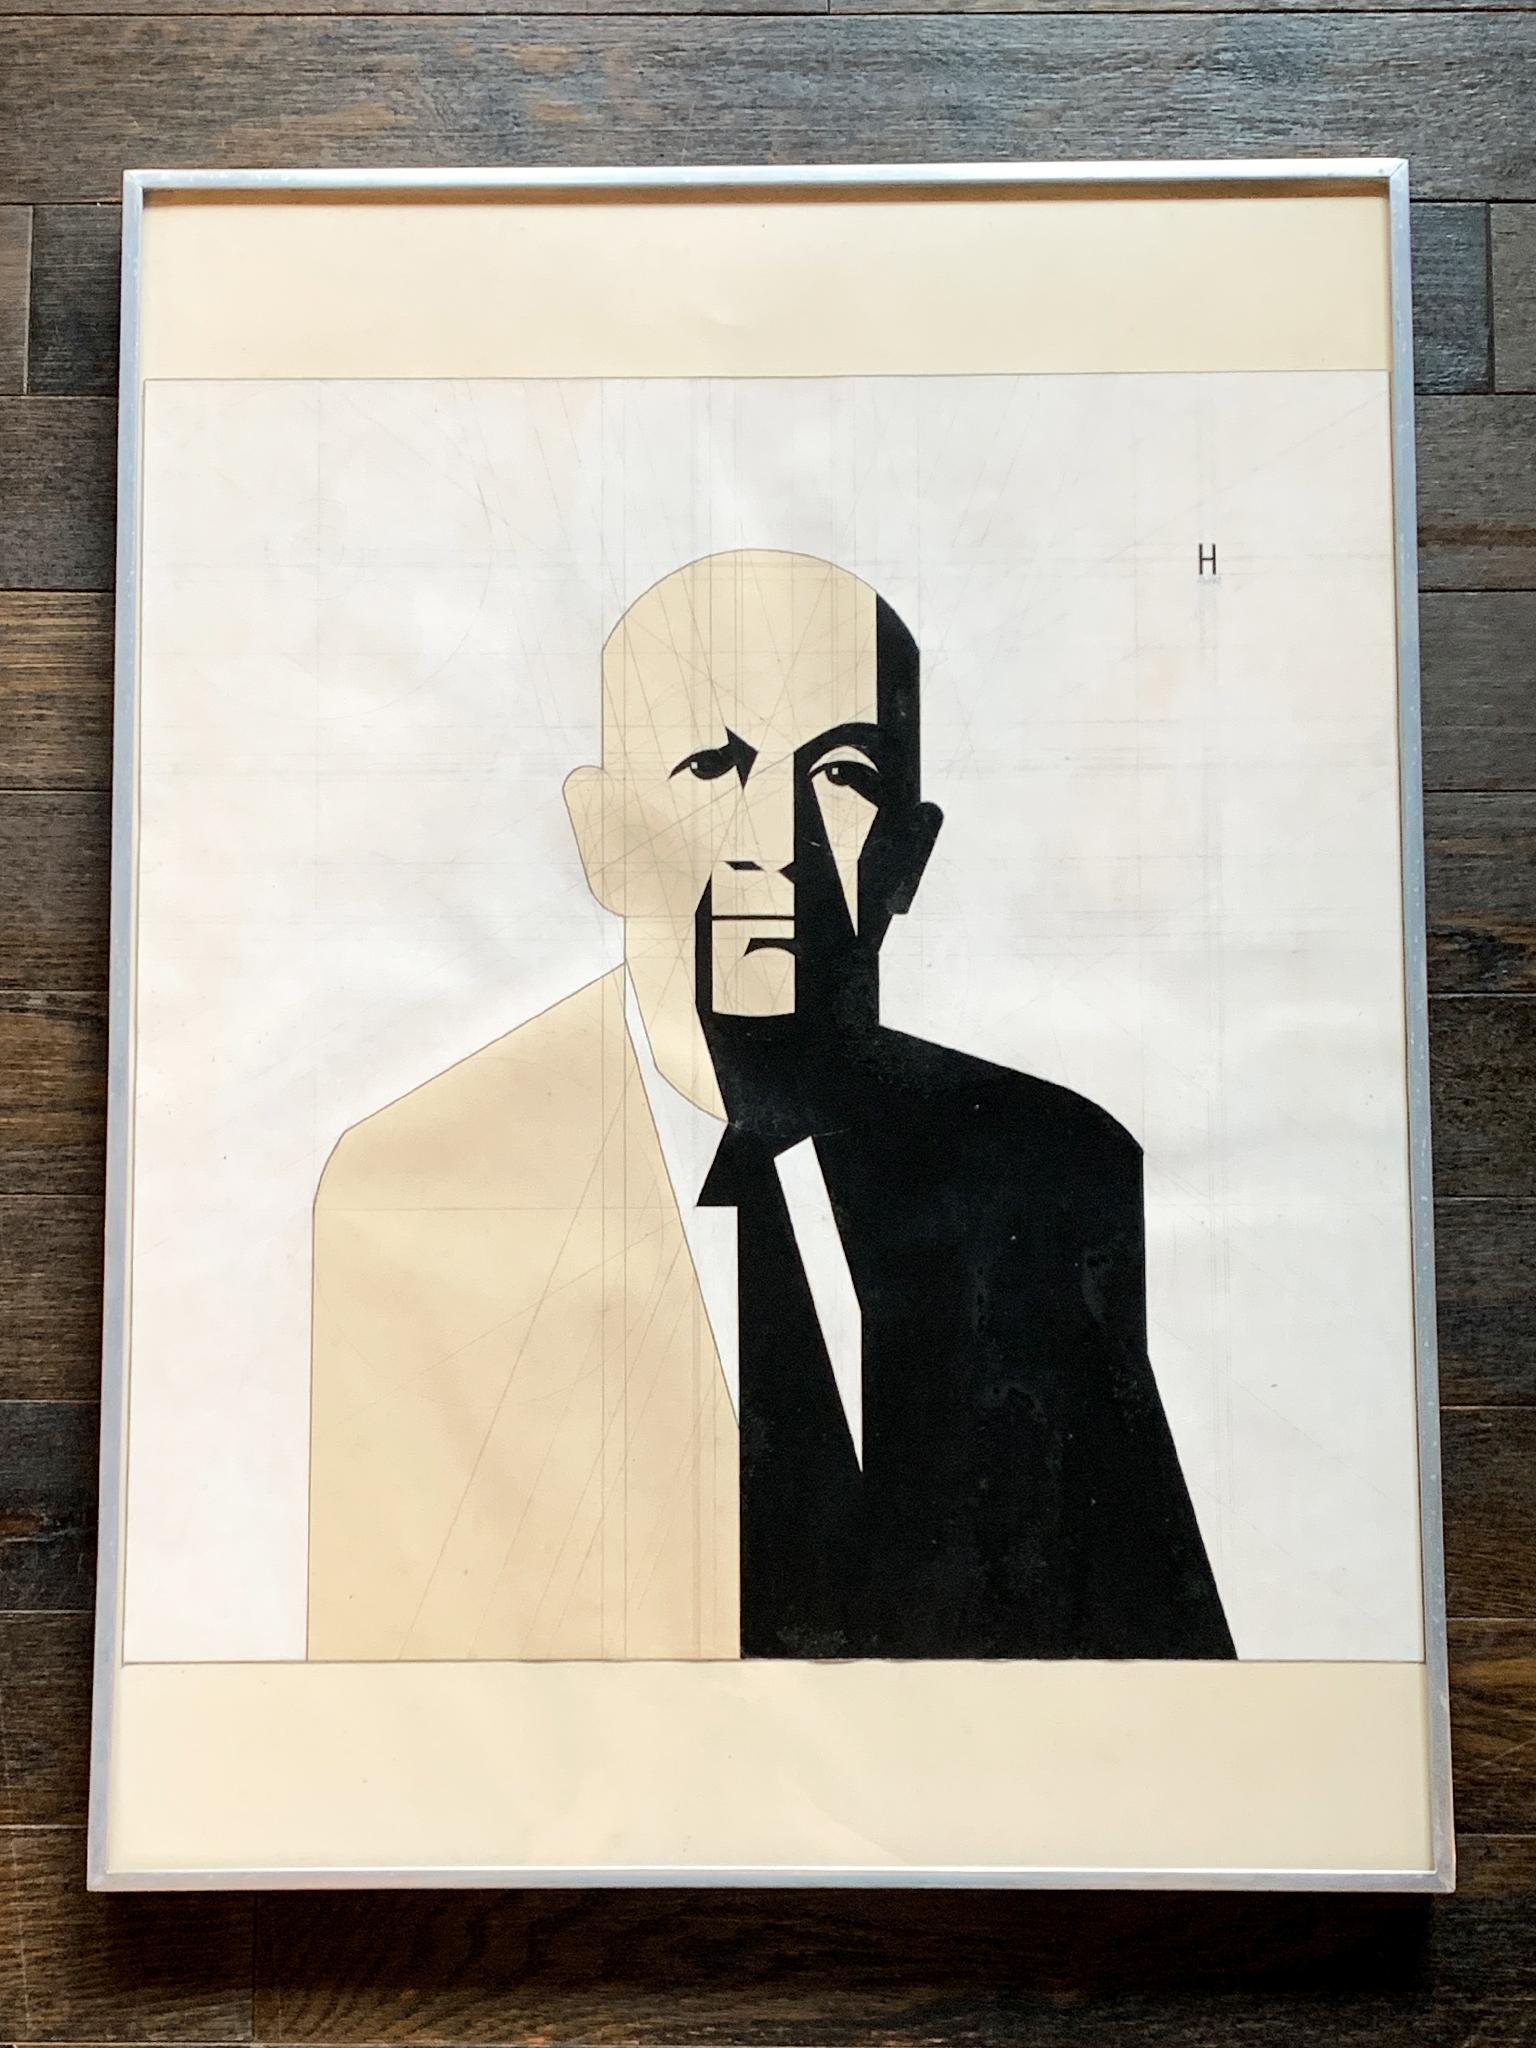 This drawing by Earl Hubbard (1923-2003) was made in 1964. It depicts the artist's father in simplified form and palette. The work is mixed-media on paper. It comes in a metal frame with glass cover.

Frame dimensions:
20 1/4 in. width
26 3/4